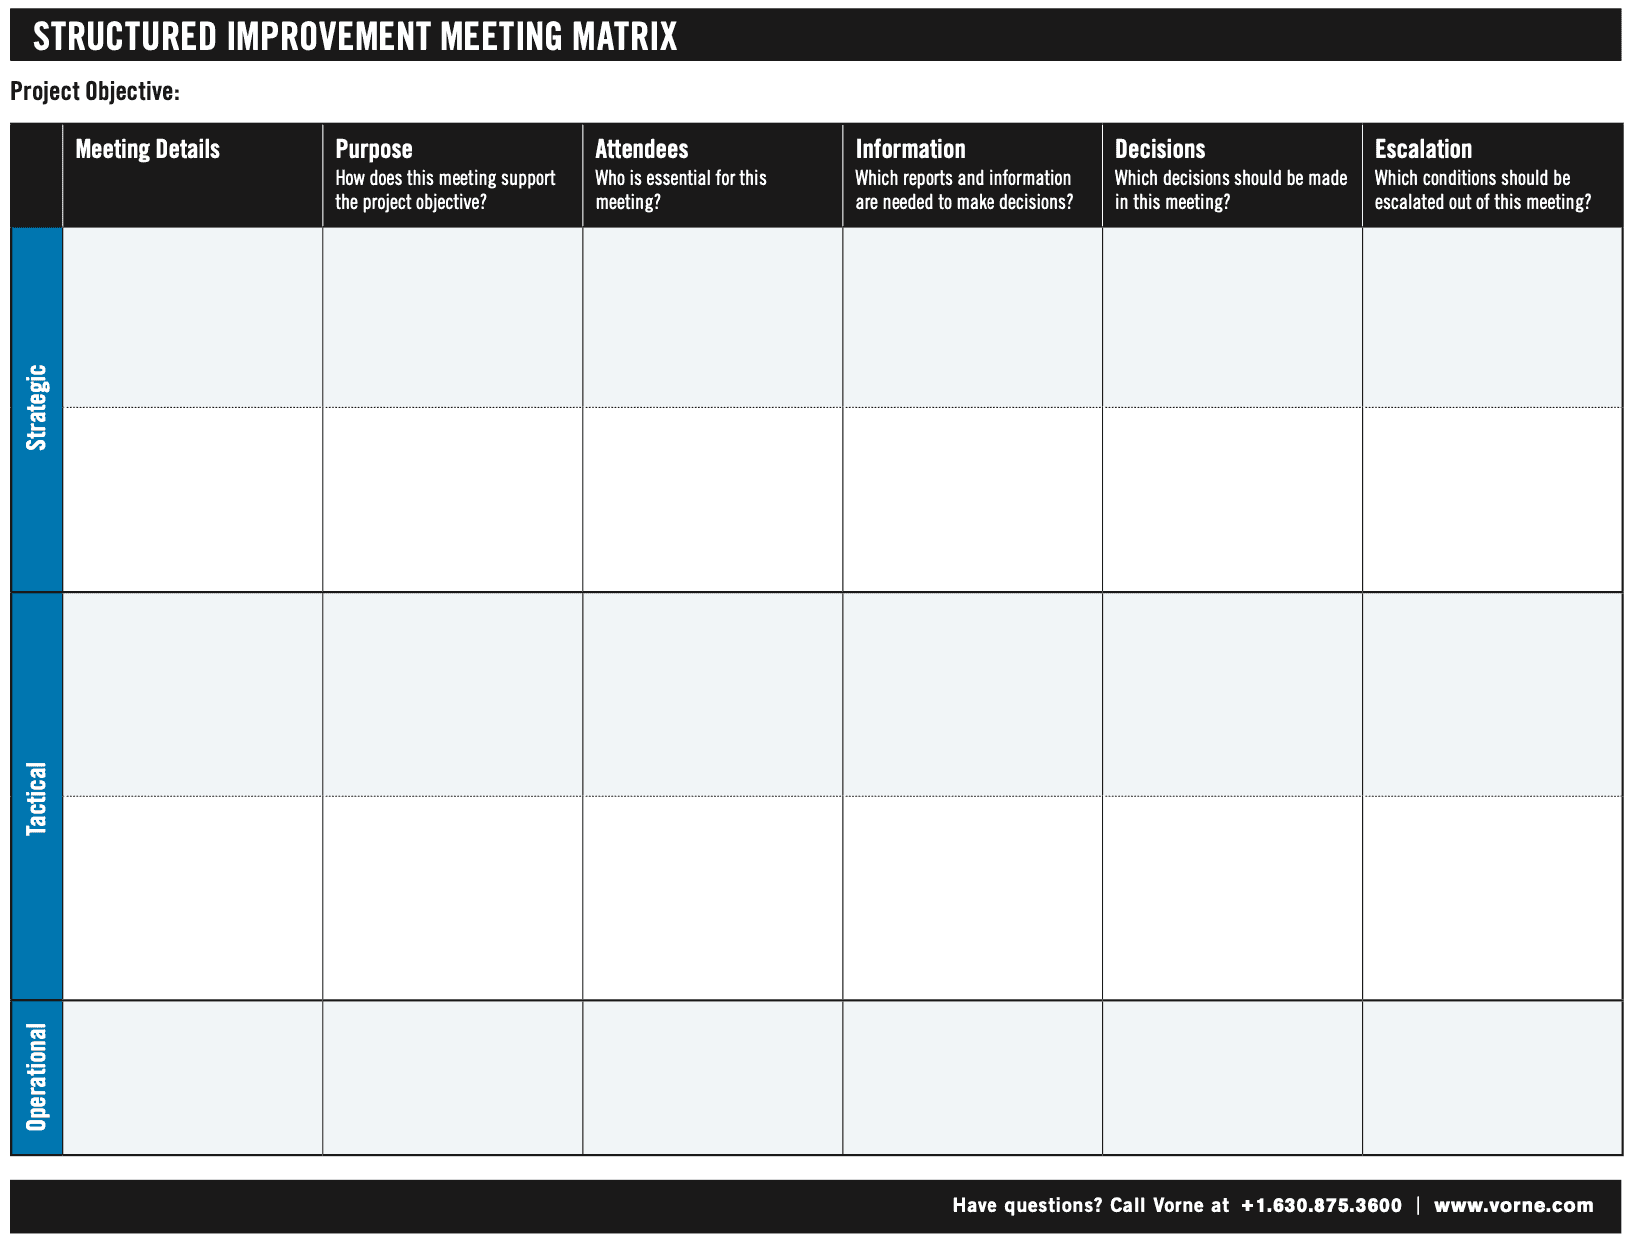 Blank meeting matrix template with sections for strategic, tactical, and operational techniques to use in improvement meetings.